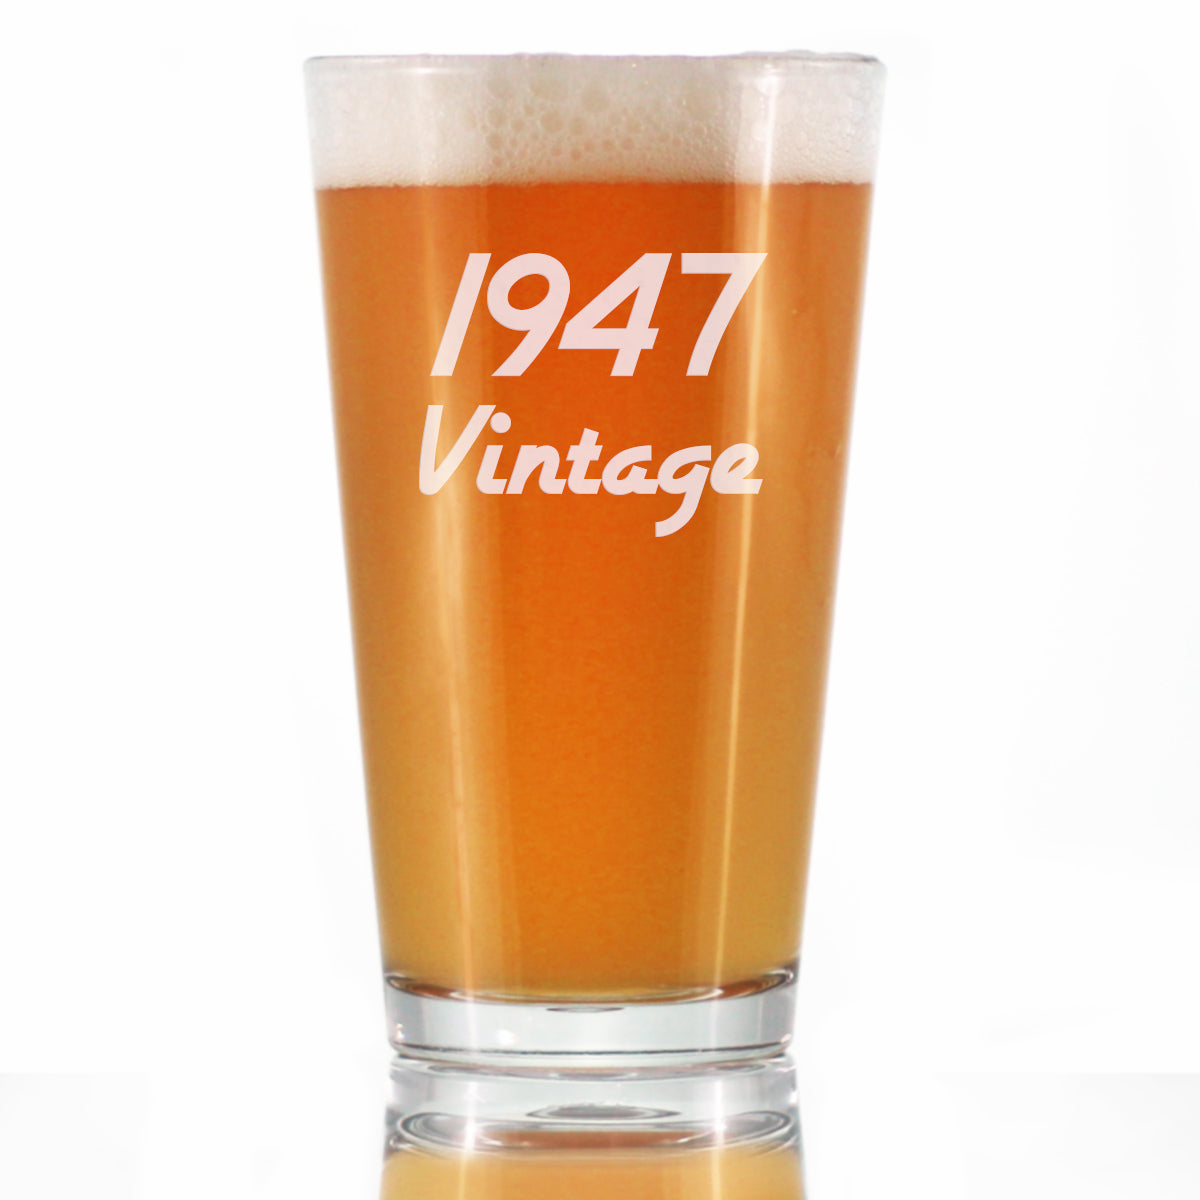 Vintage 1947 - Pint Glass for Beer - 77th Birthday Gifts for Men or Women Turning 77 - Fun Bday Party Decor - 16 oz